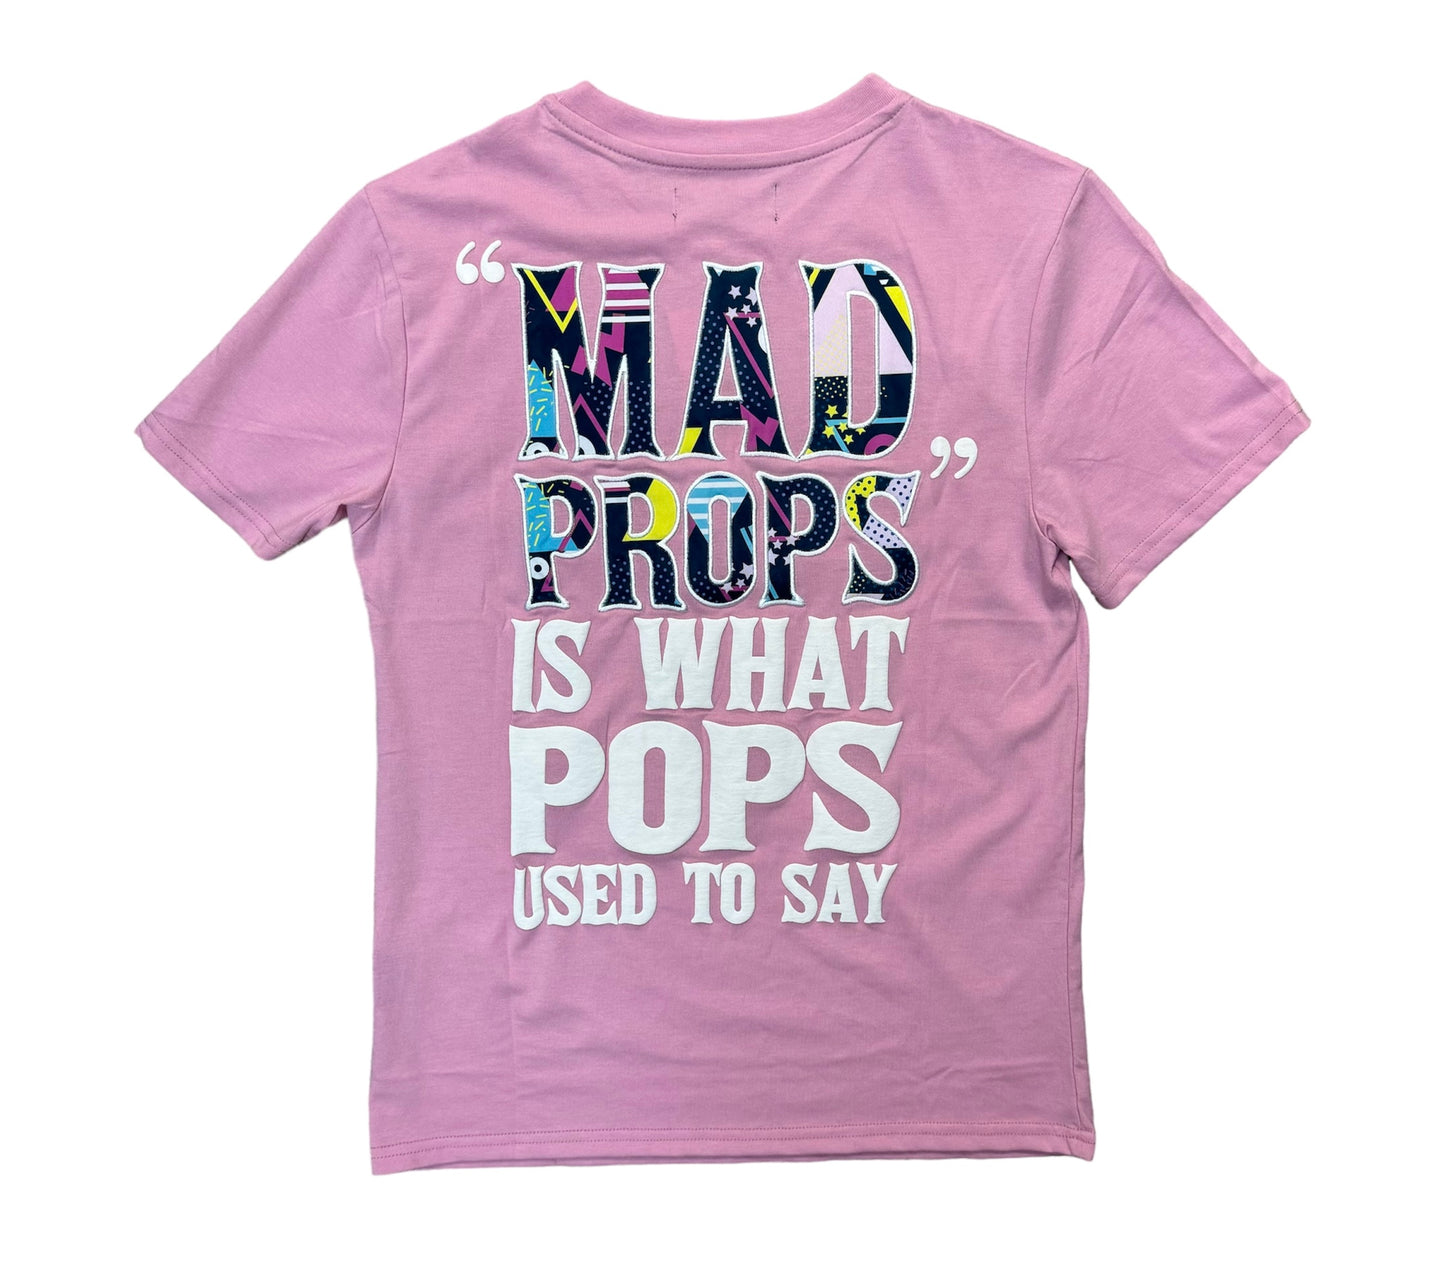 Rebel Minds Props Graphic Pink T-Shirt